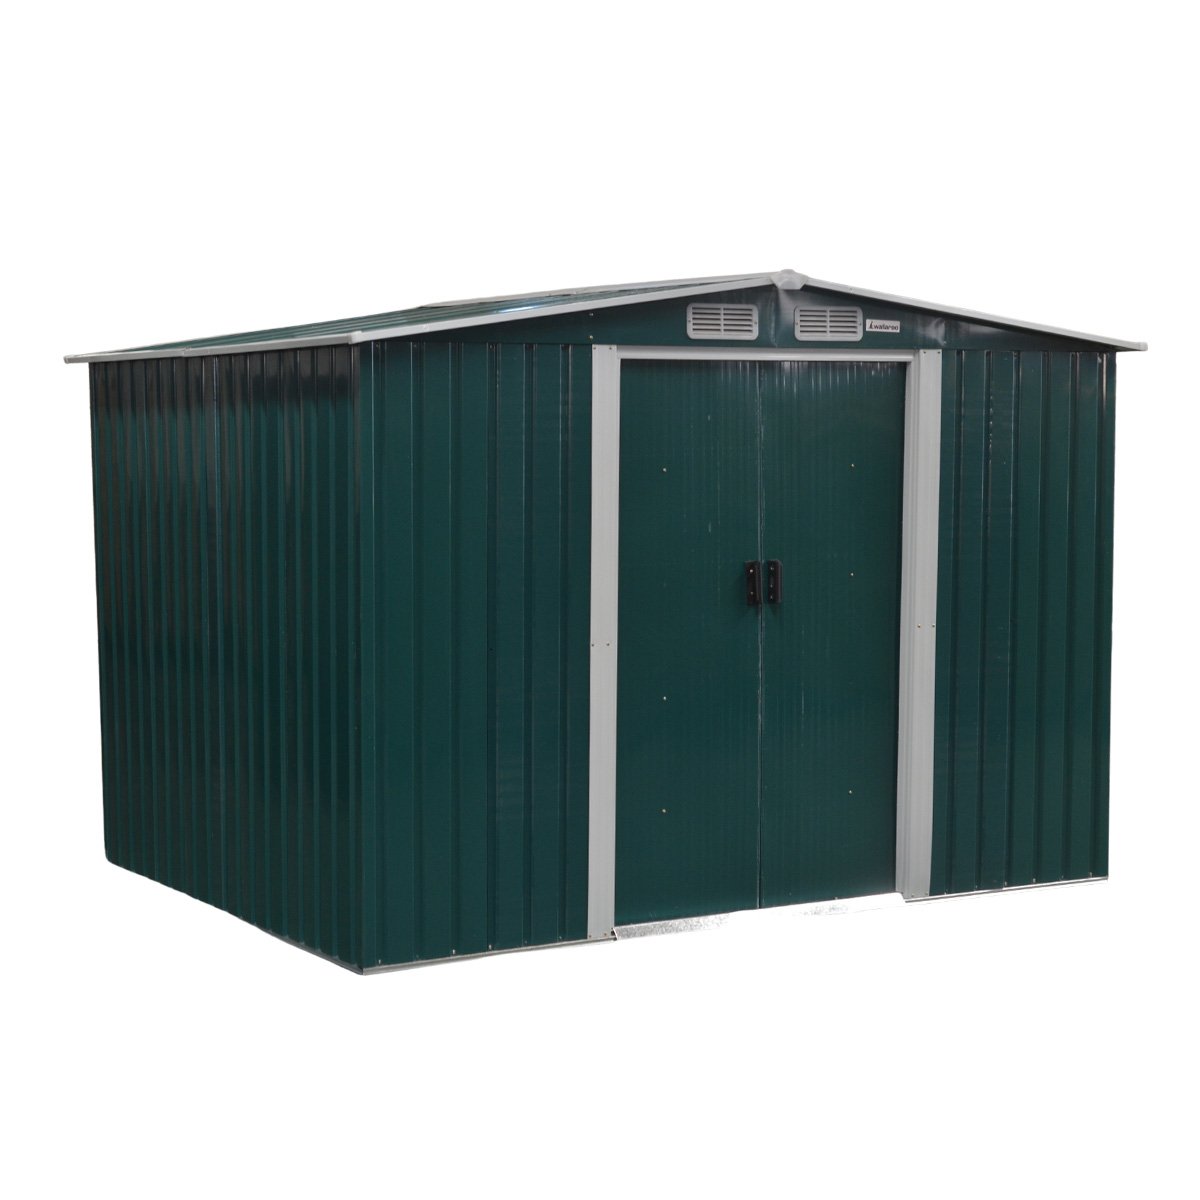 Garden Shed Spire Roof 6ft x 8ft Outdoor Storage Shelter - Green 2